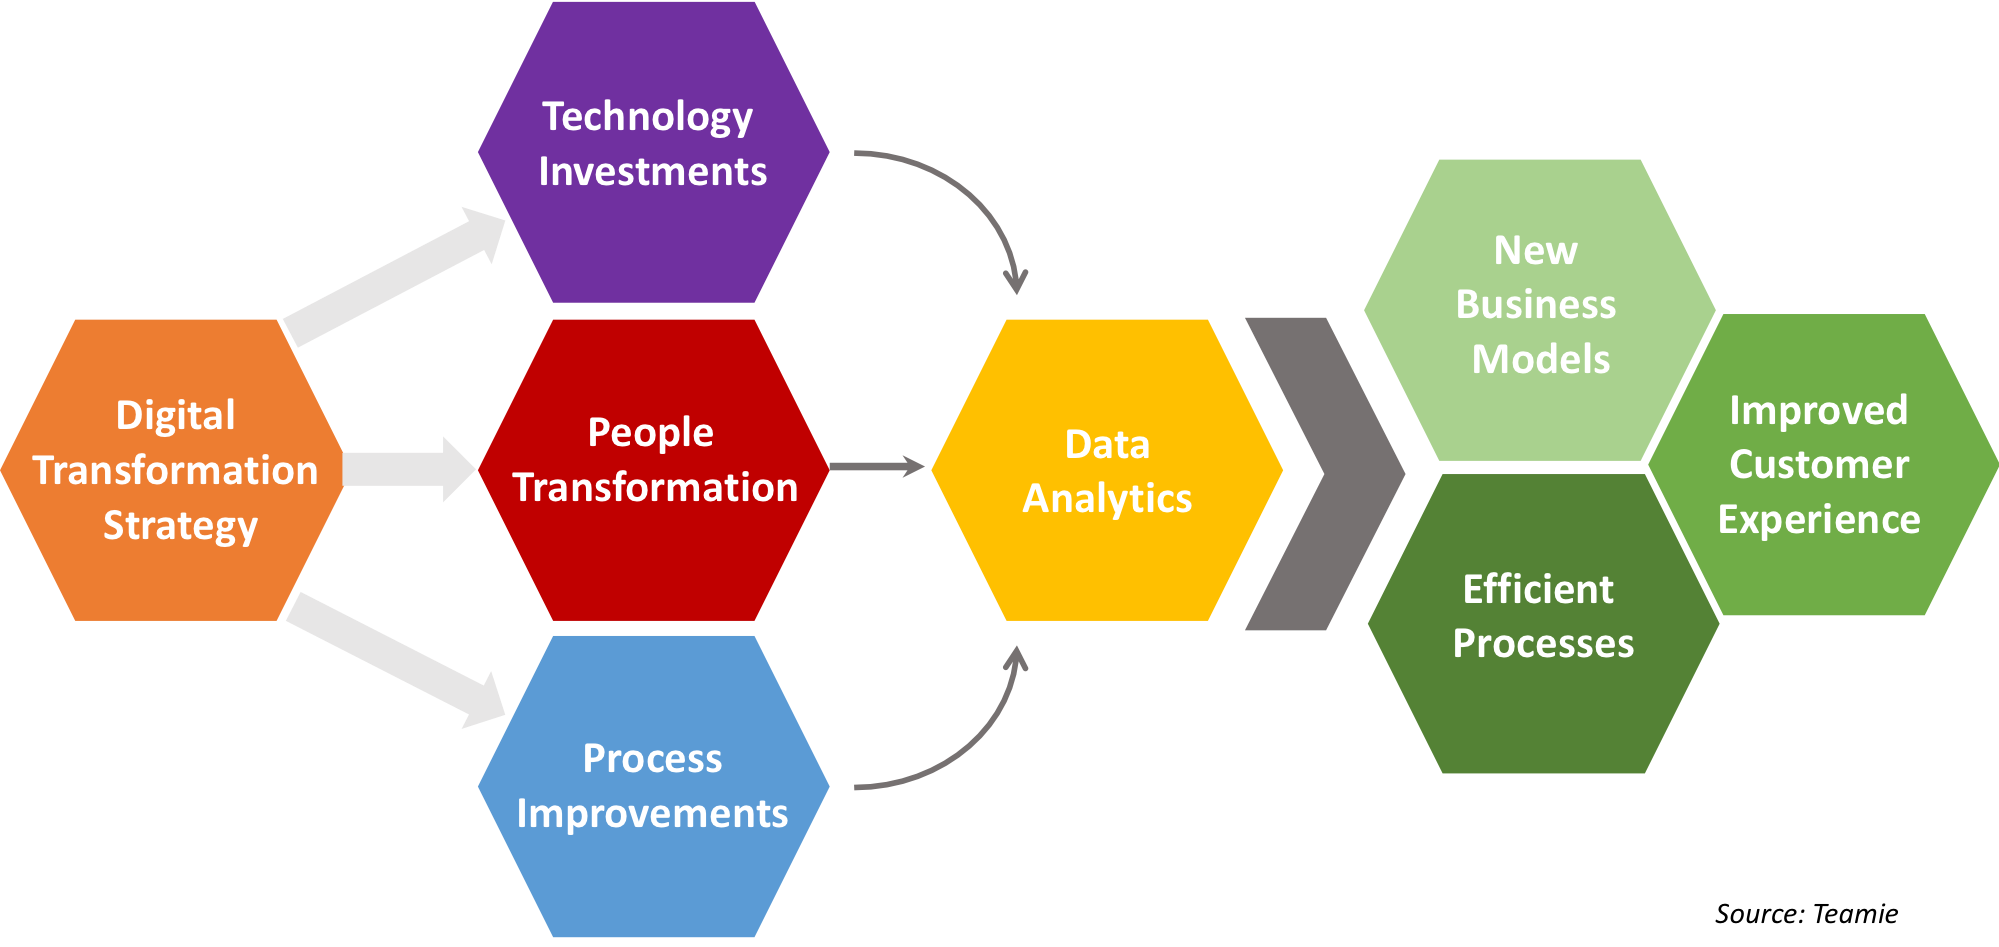 Digital Transformation Building Blocks and Outcomes